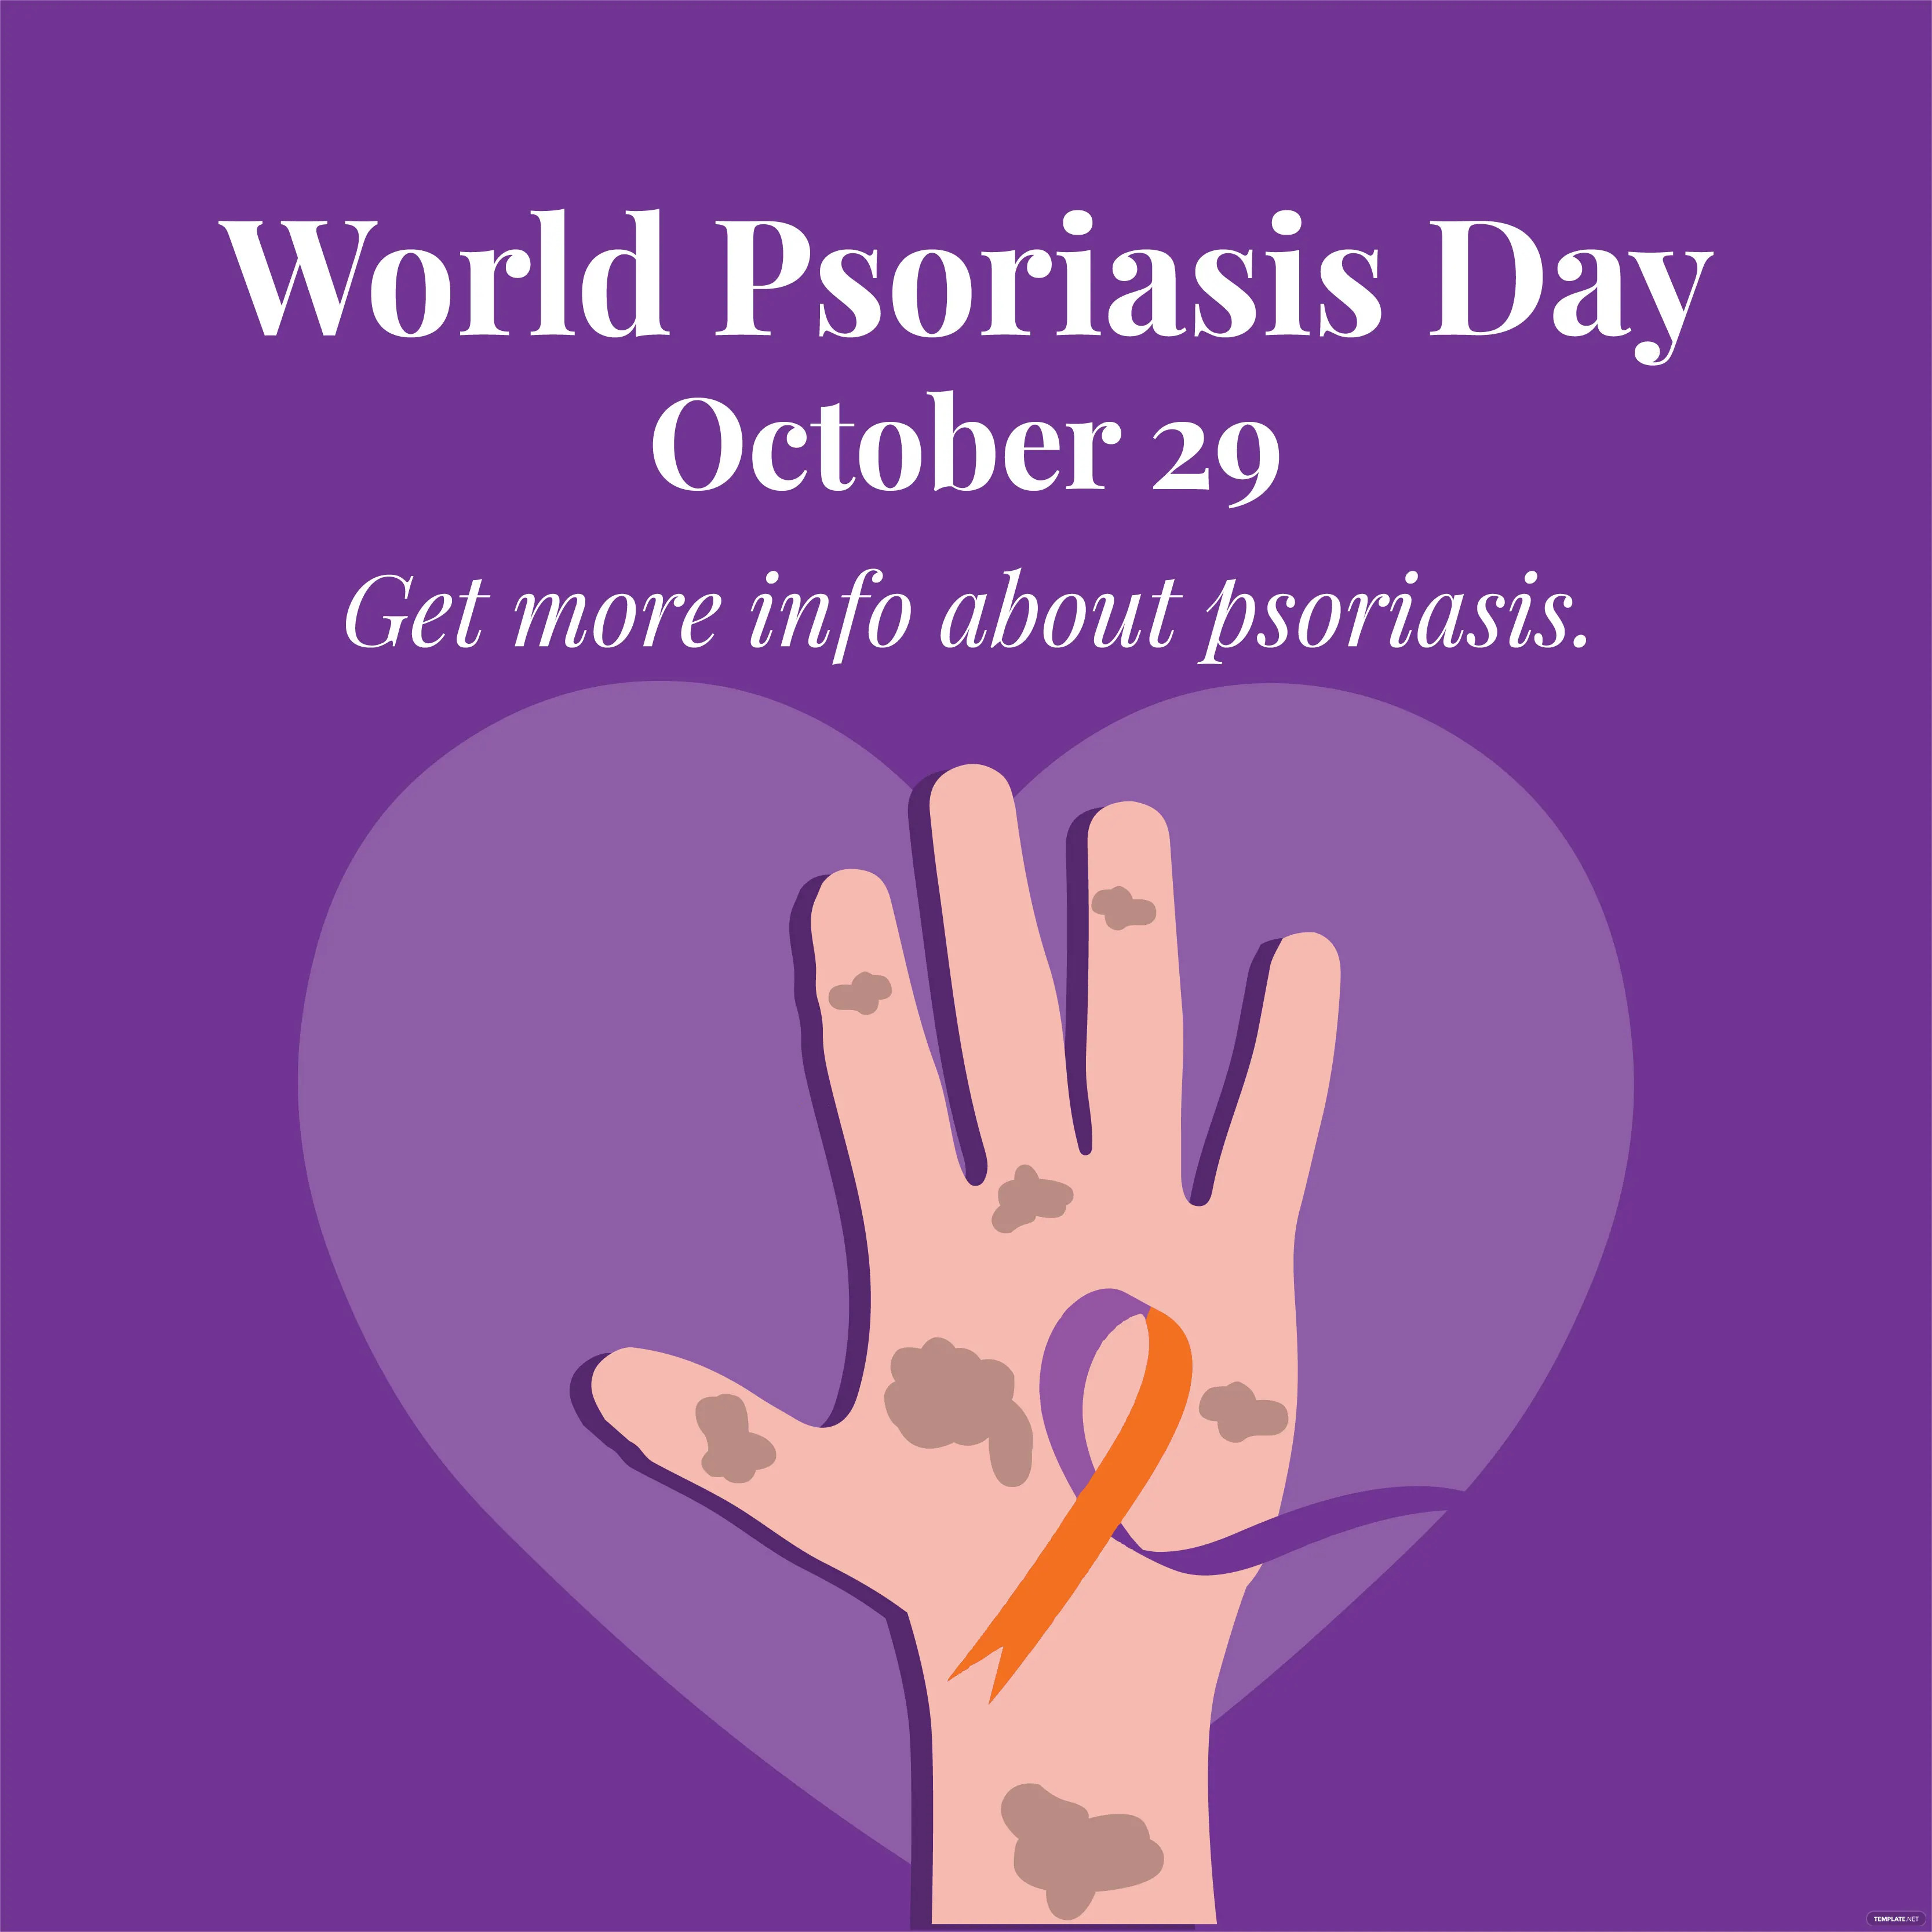 world psoriasis day whatsapp post ideas examples